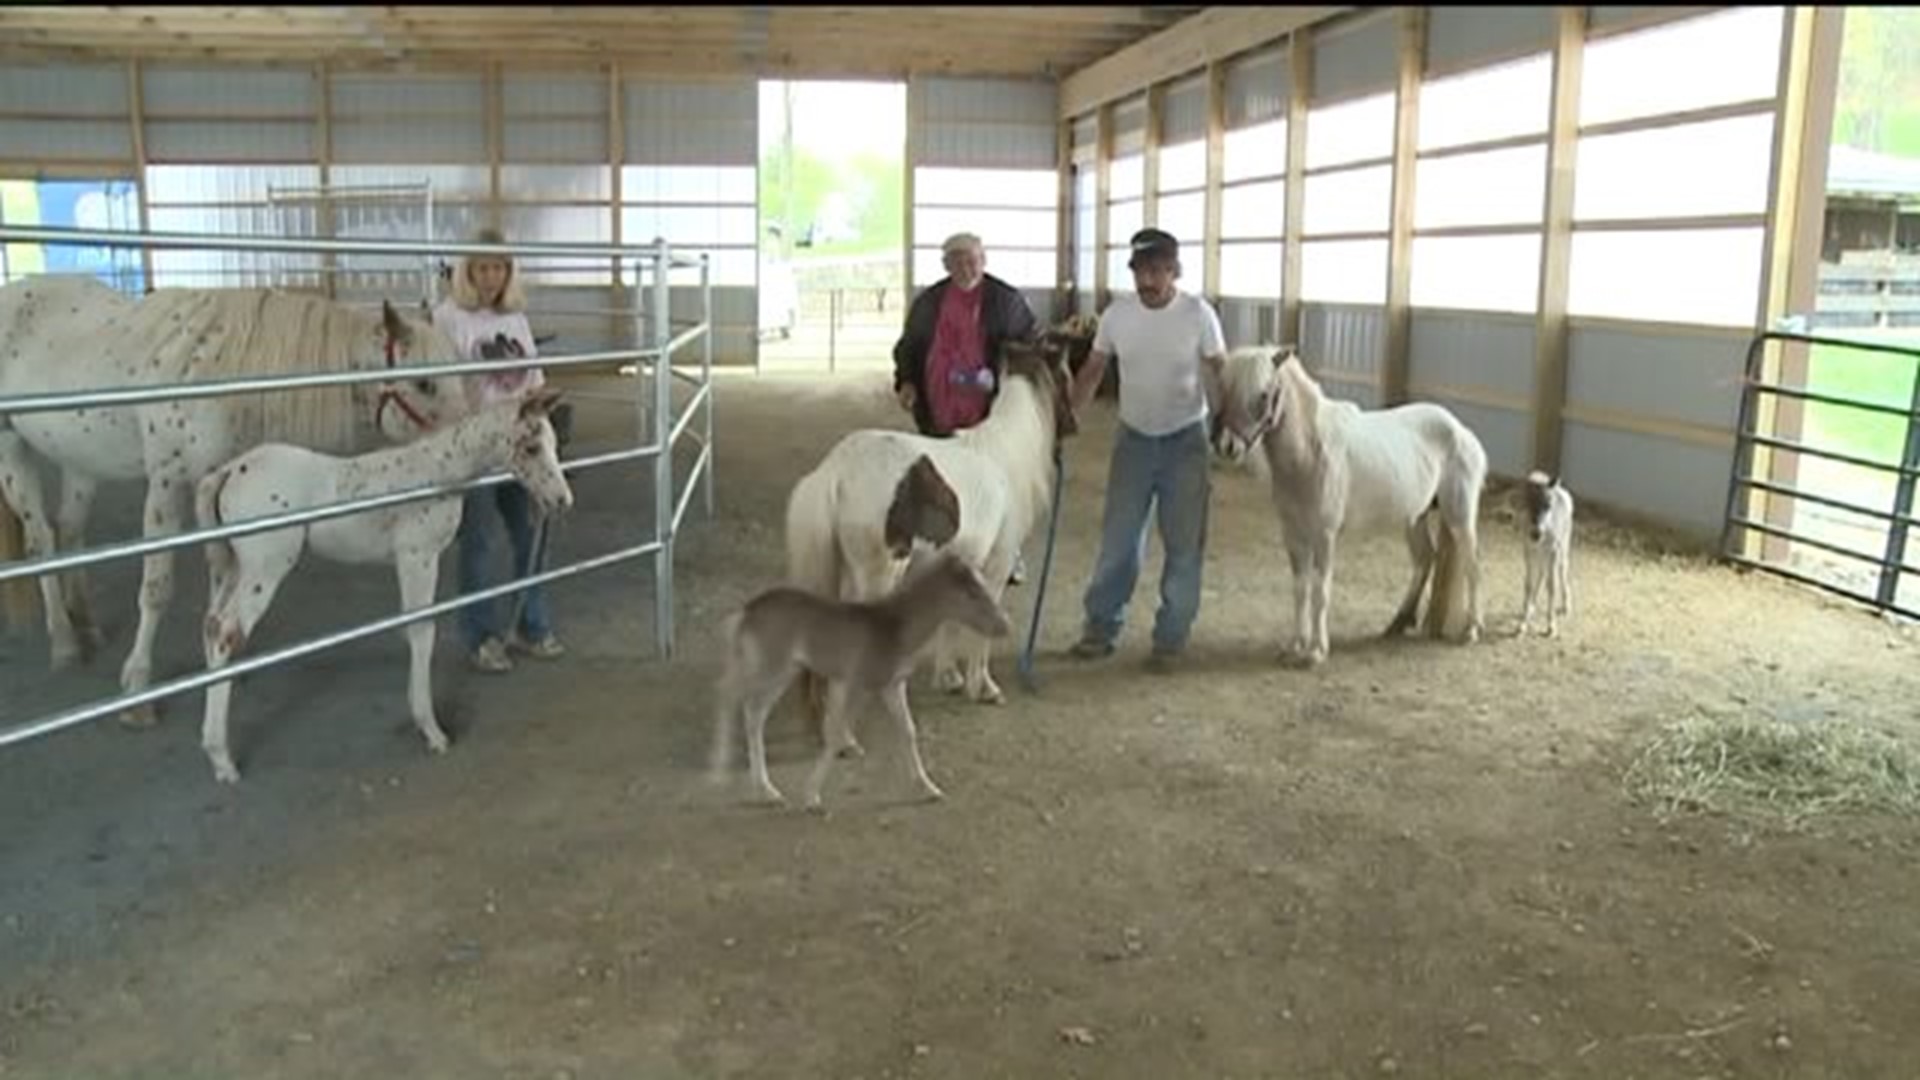 Carbon County Farm Welcomes Three New Horses